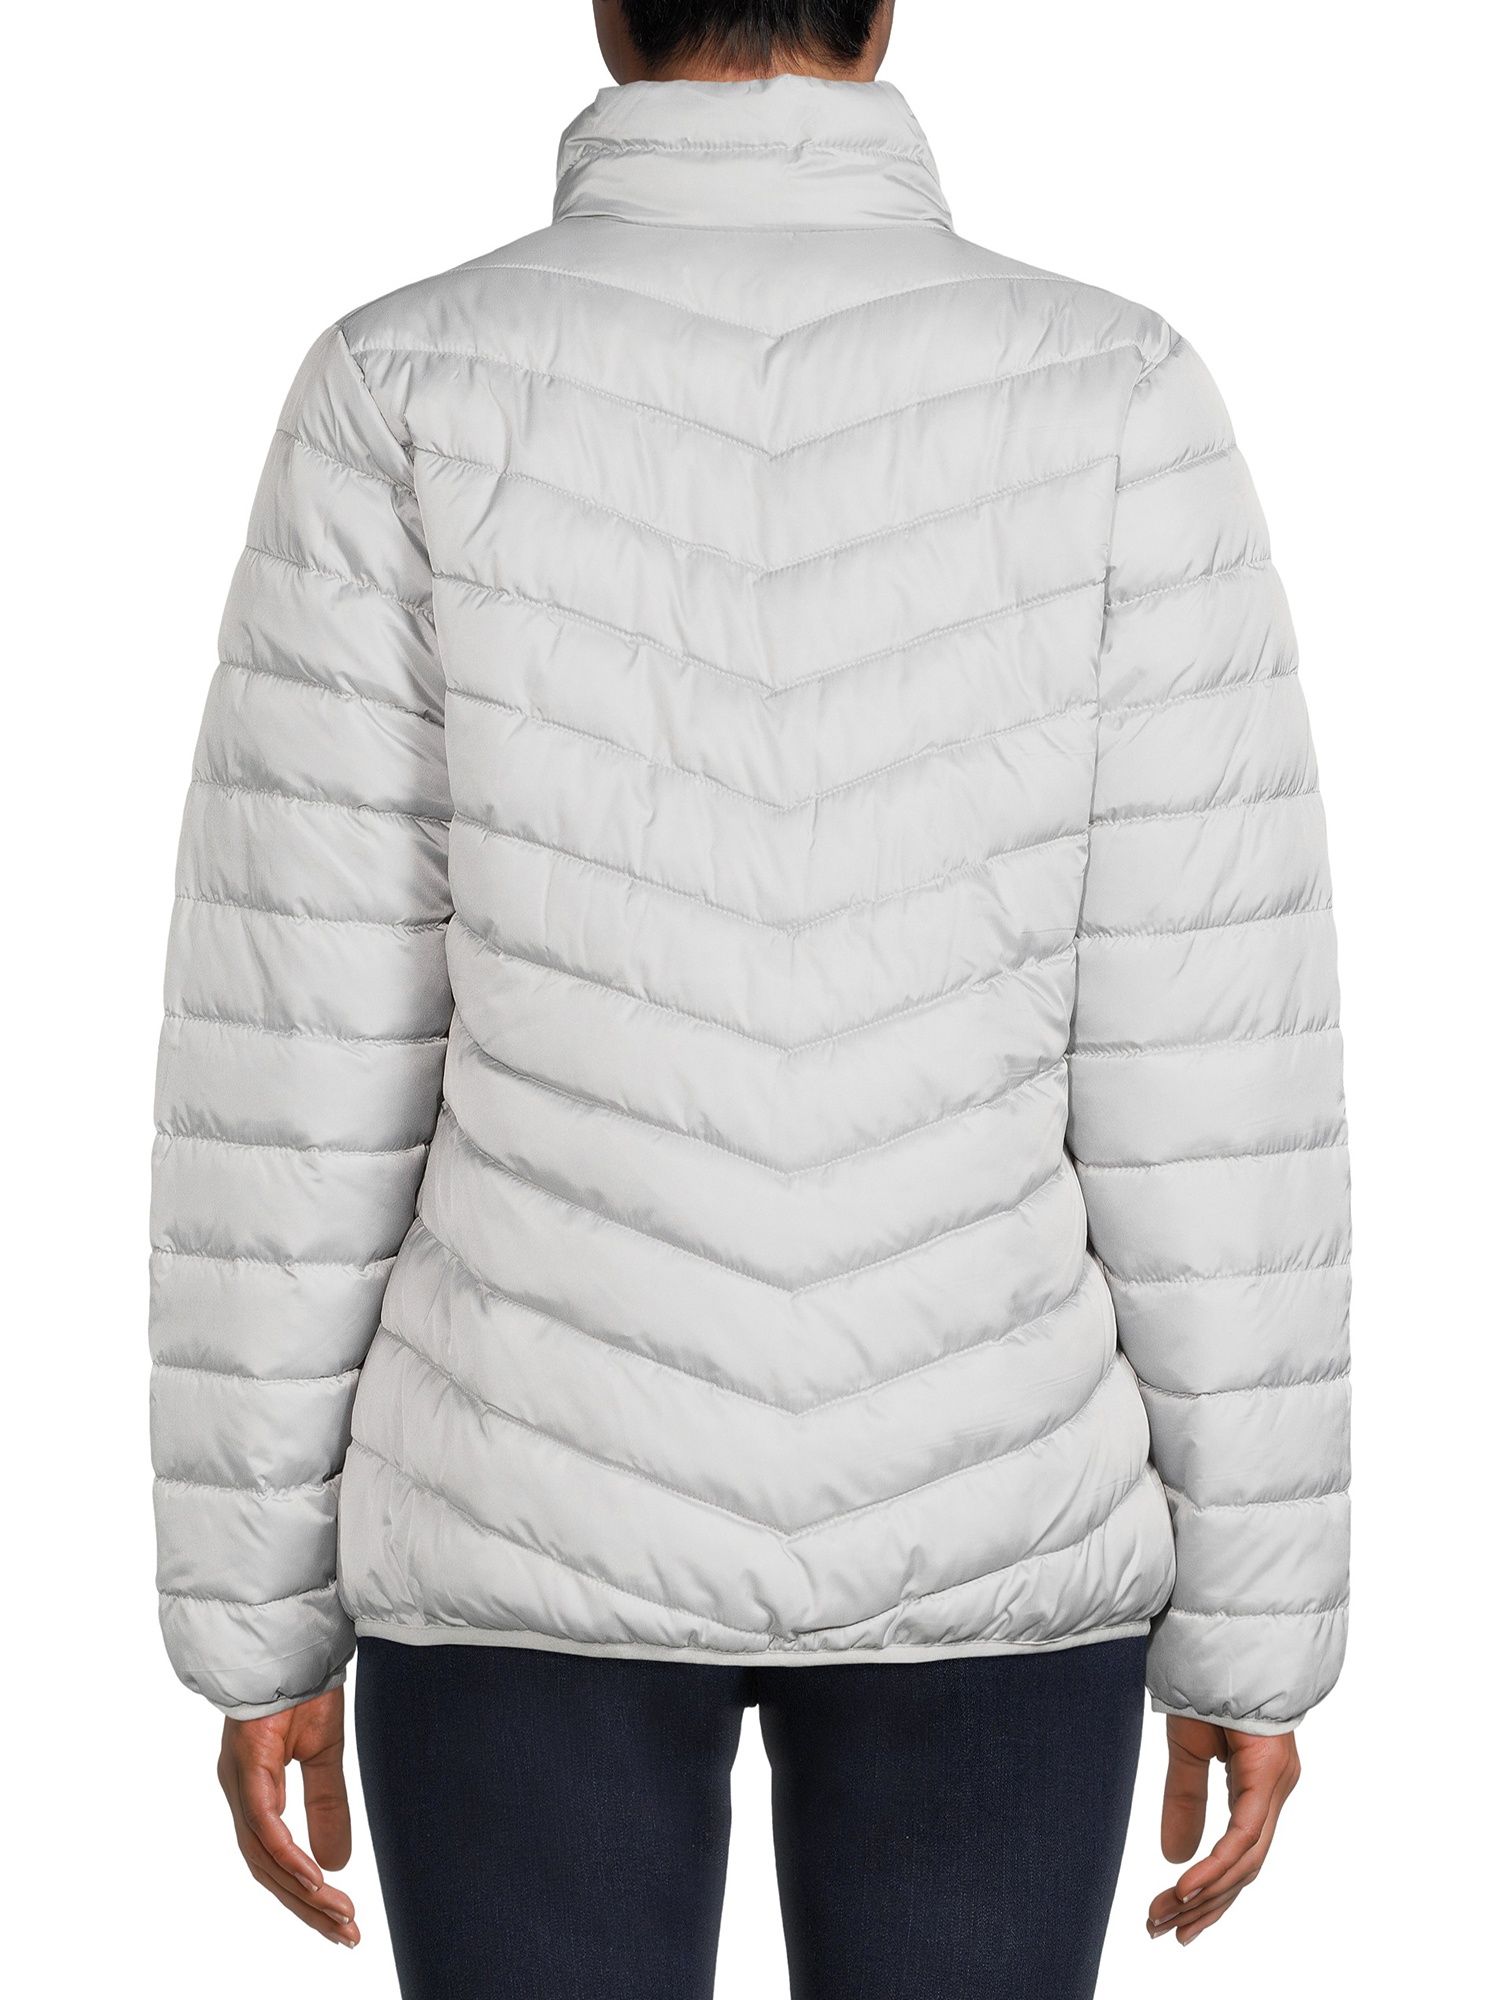 Big Chill Women's Packable Puffer Jacket, Sizes S-XL - image 5 of 5